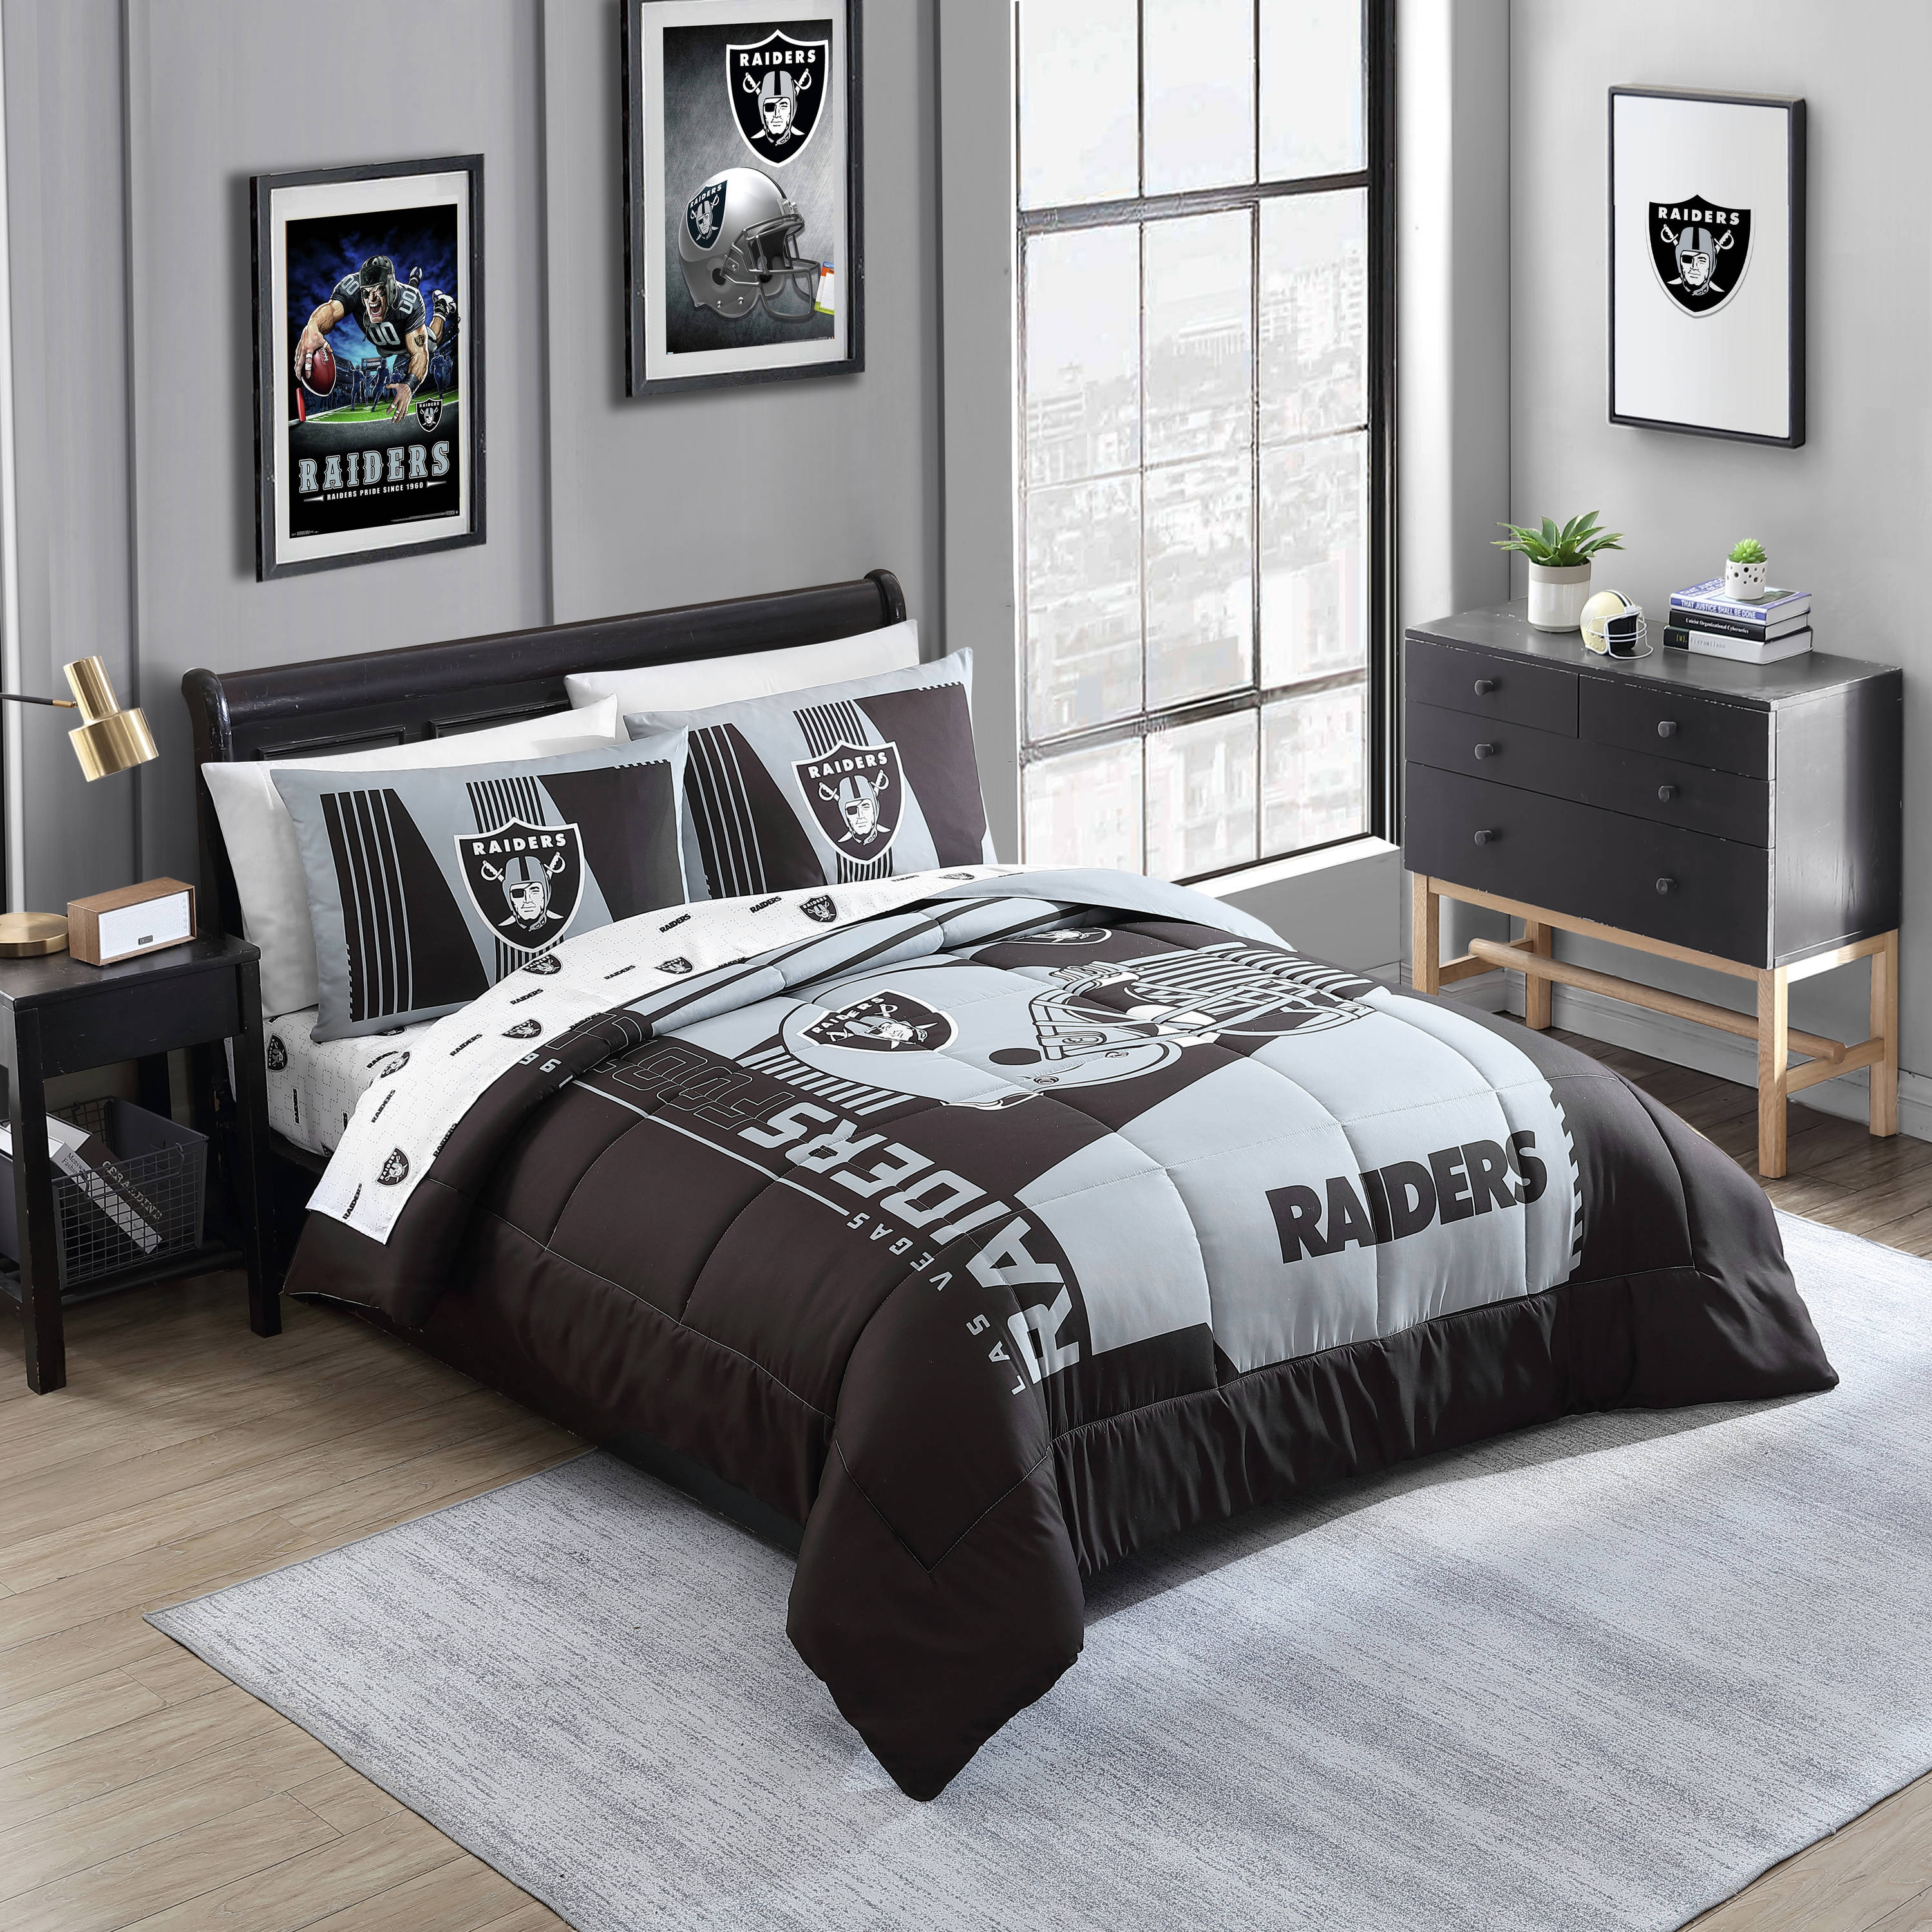 Details about   Las Vegas Raiders Fitted Sheet Cover Fitted Sheet & Pillowcases Bedding Set 3PCS 